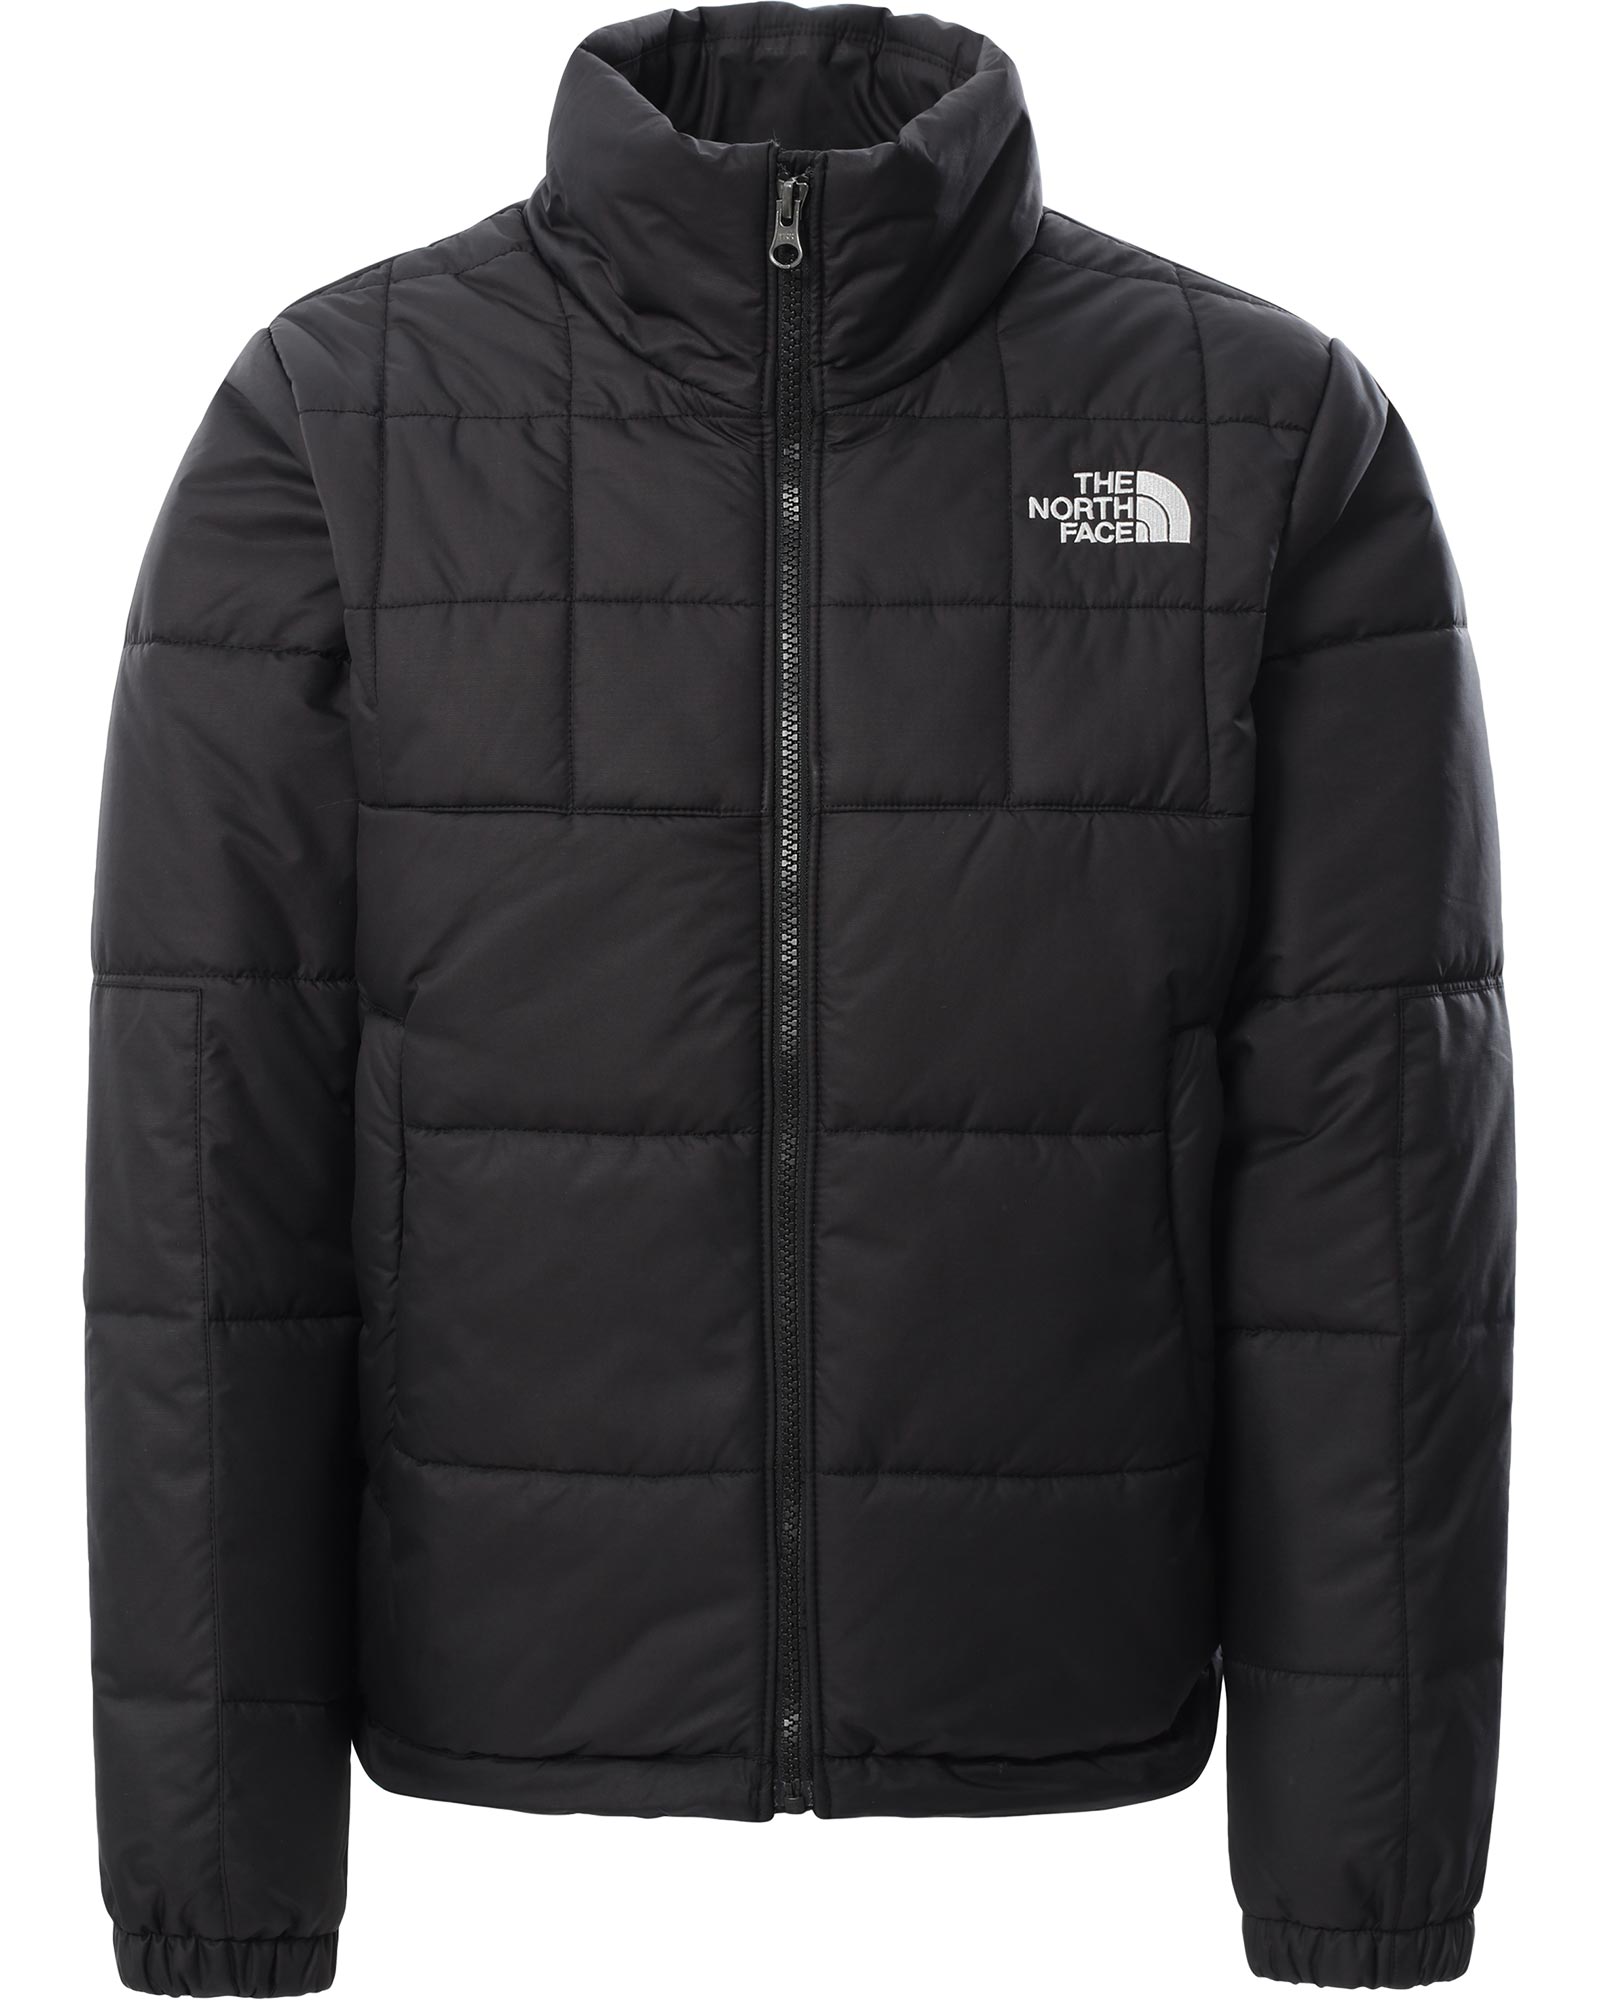 The North Face Youth Lobuche Jacket